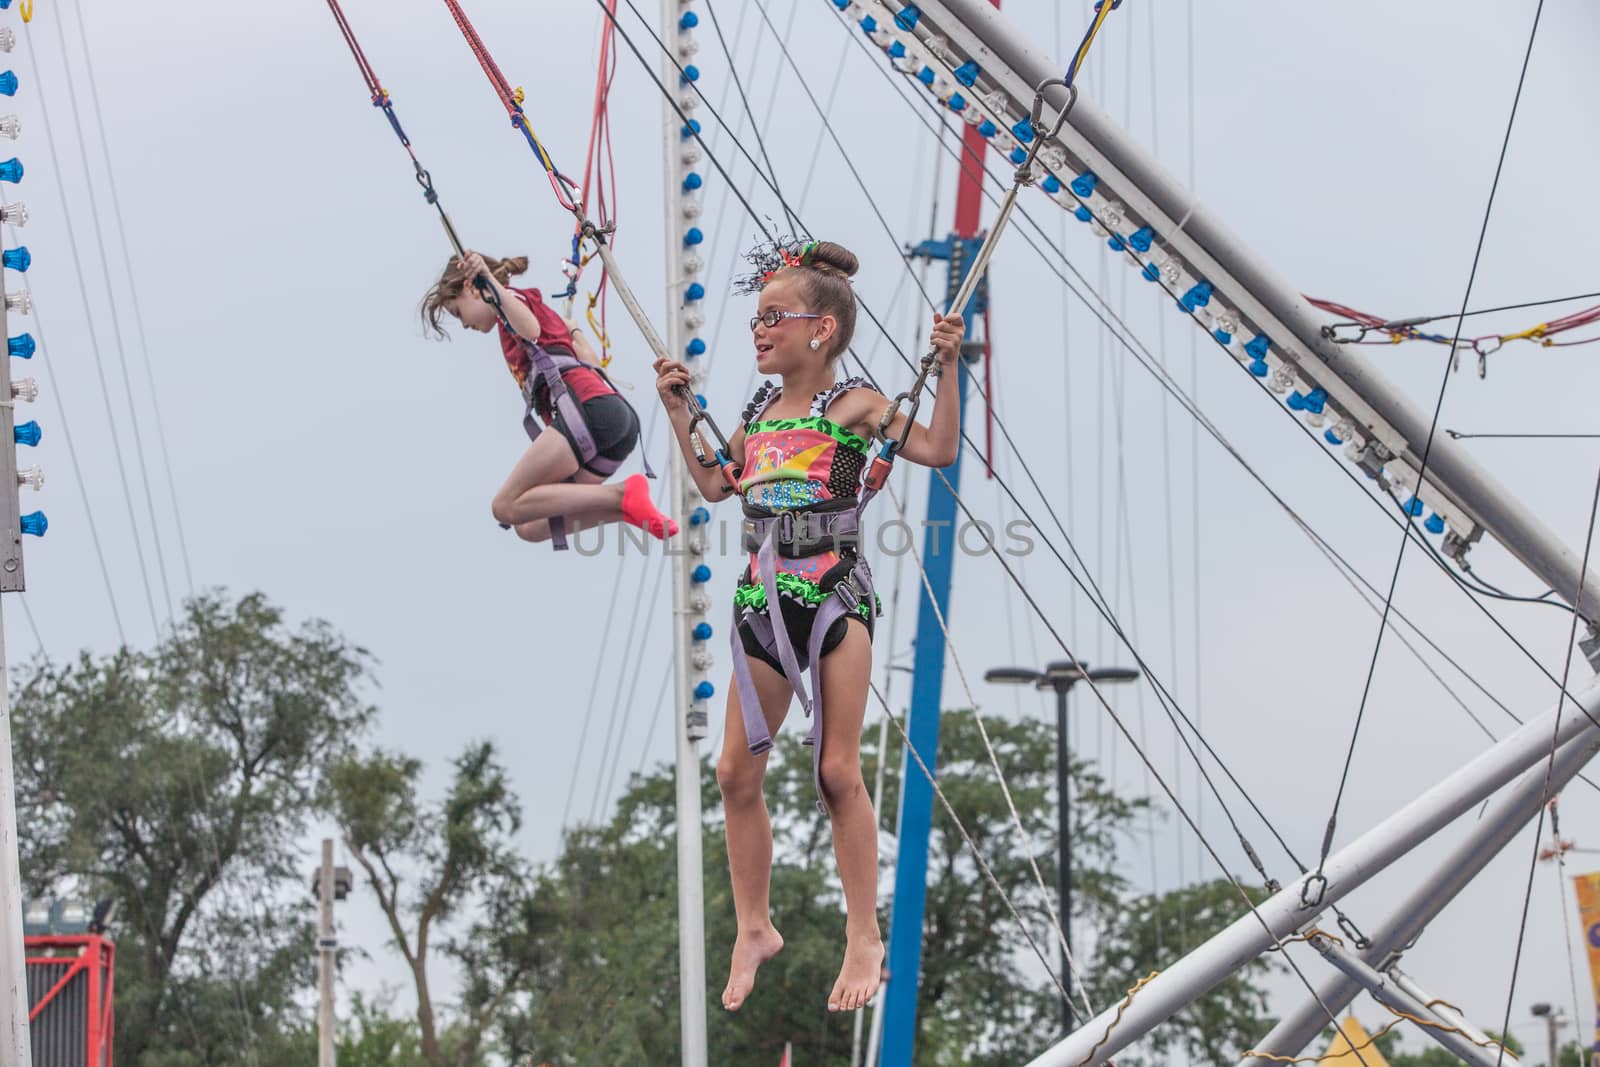 DES MOINES, IA /USA - AUGUST 10: Unidentified girls jumping in harnesses on carnival jumping apparatus at the Iowa State Fair on August 10, 2014 in Des Moines, Iowa, USA.